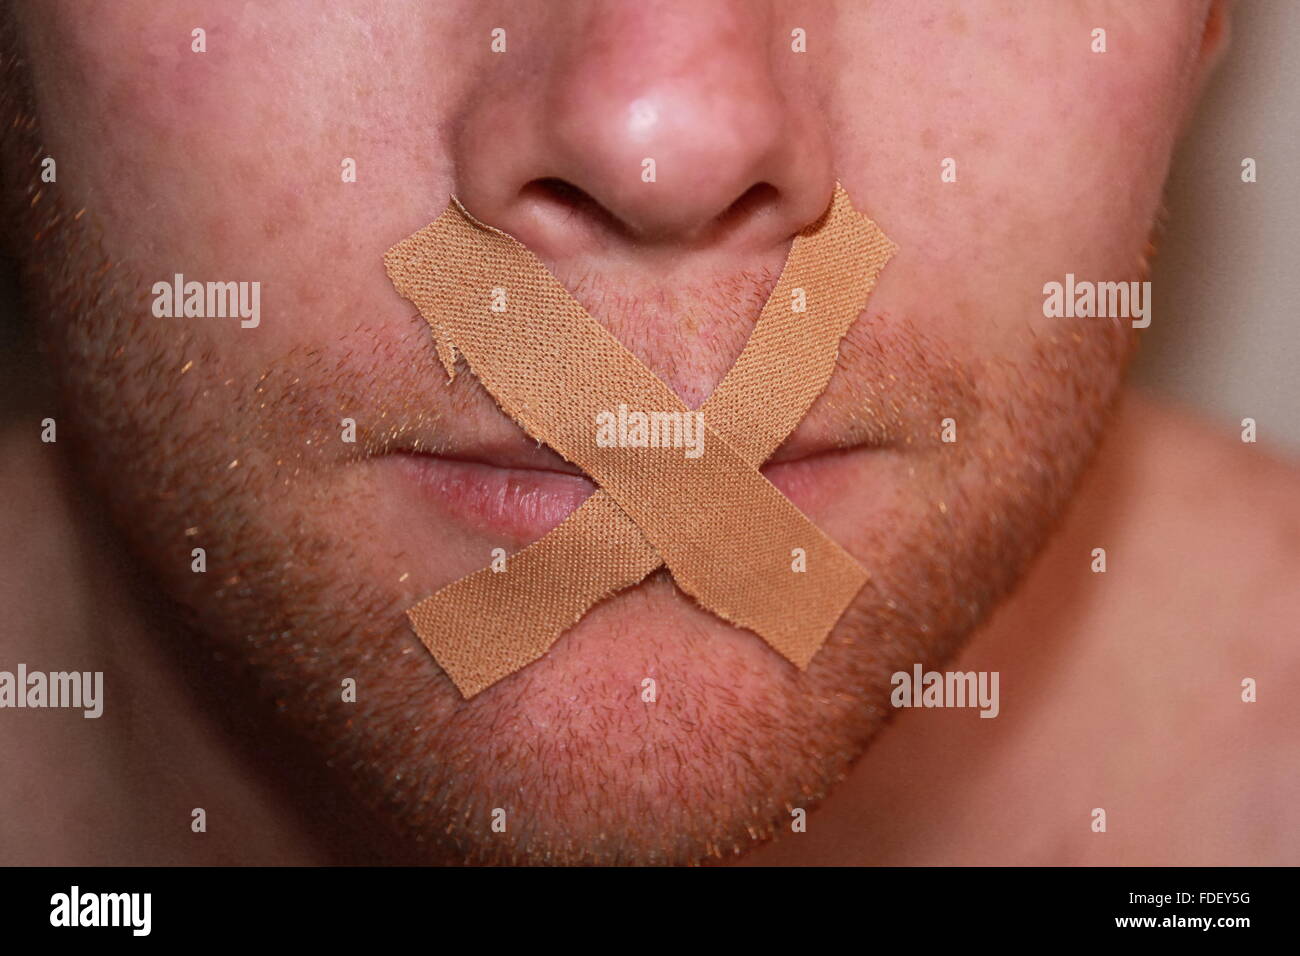 tape covers mouth of a man Stock Photo